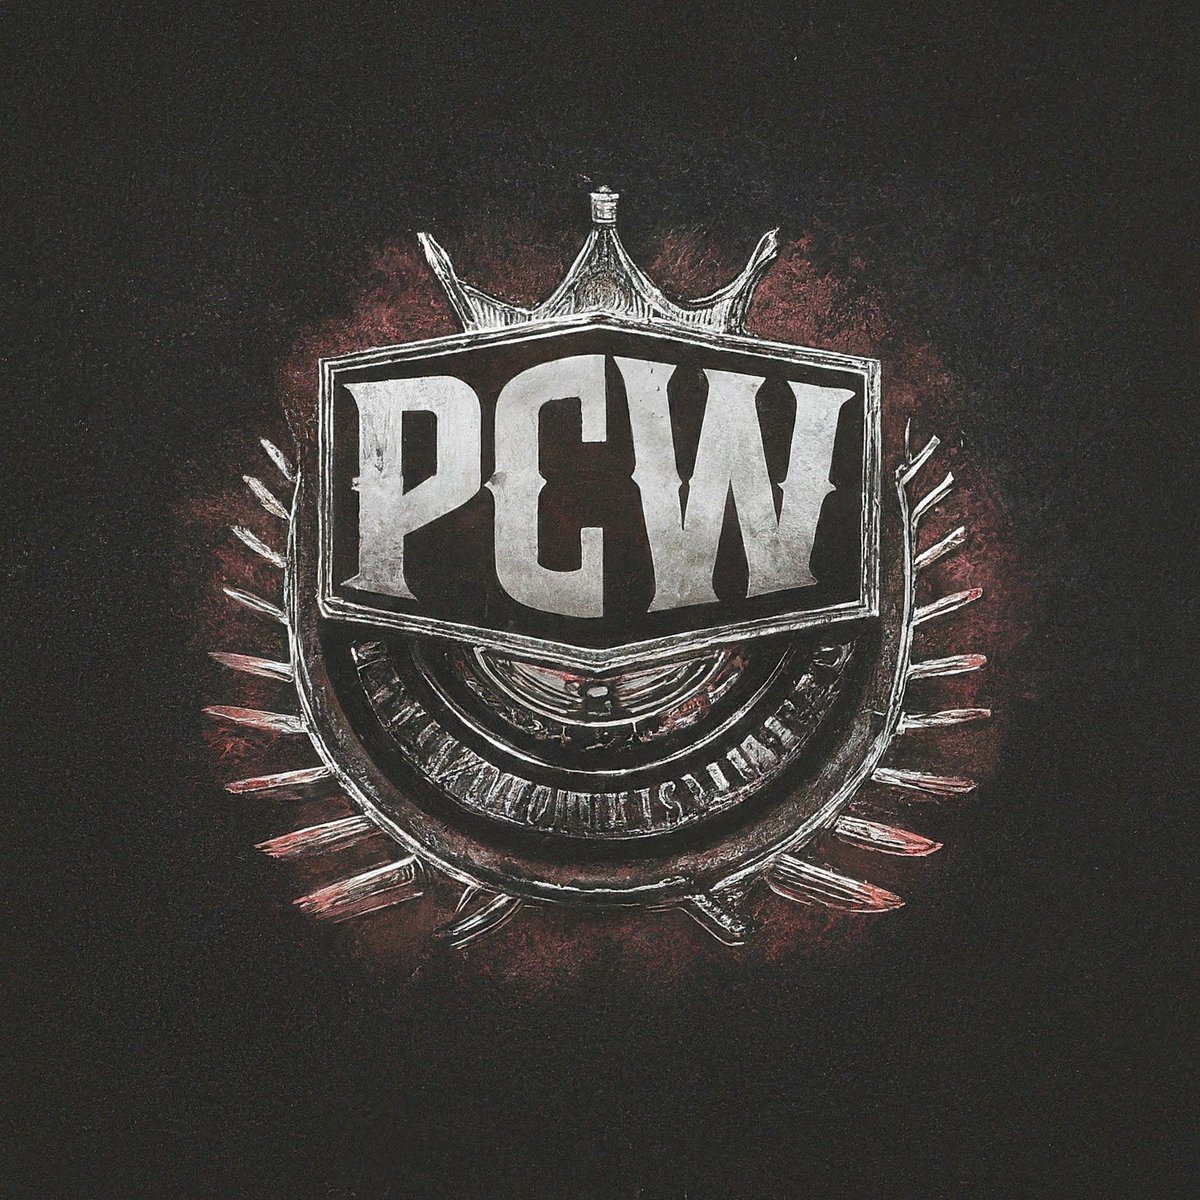 PCW IT IS NOW WHICH LOGO WE ROCKING WITH????